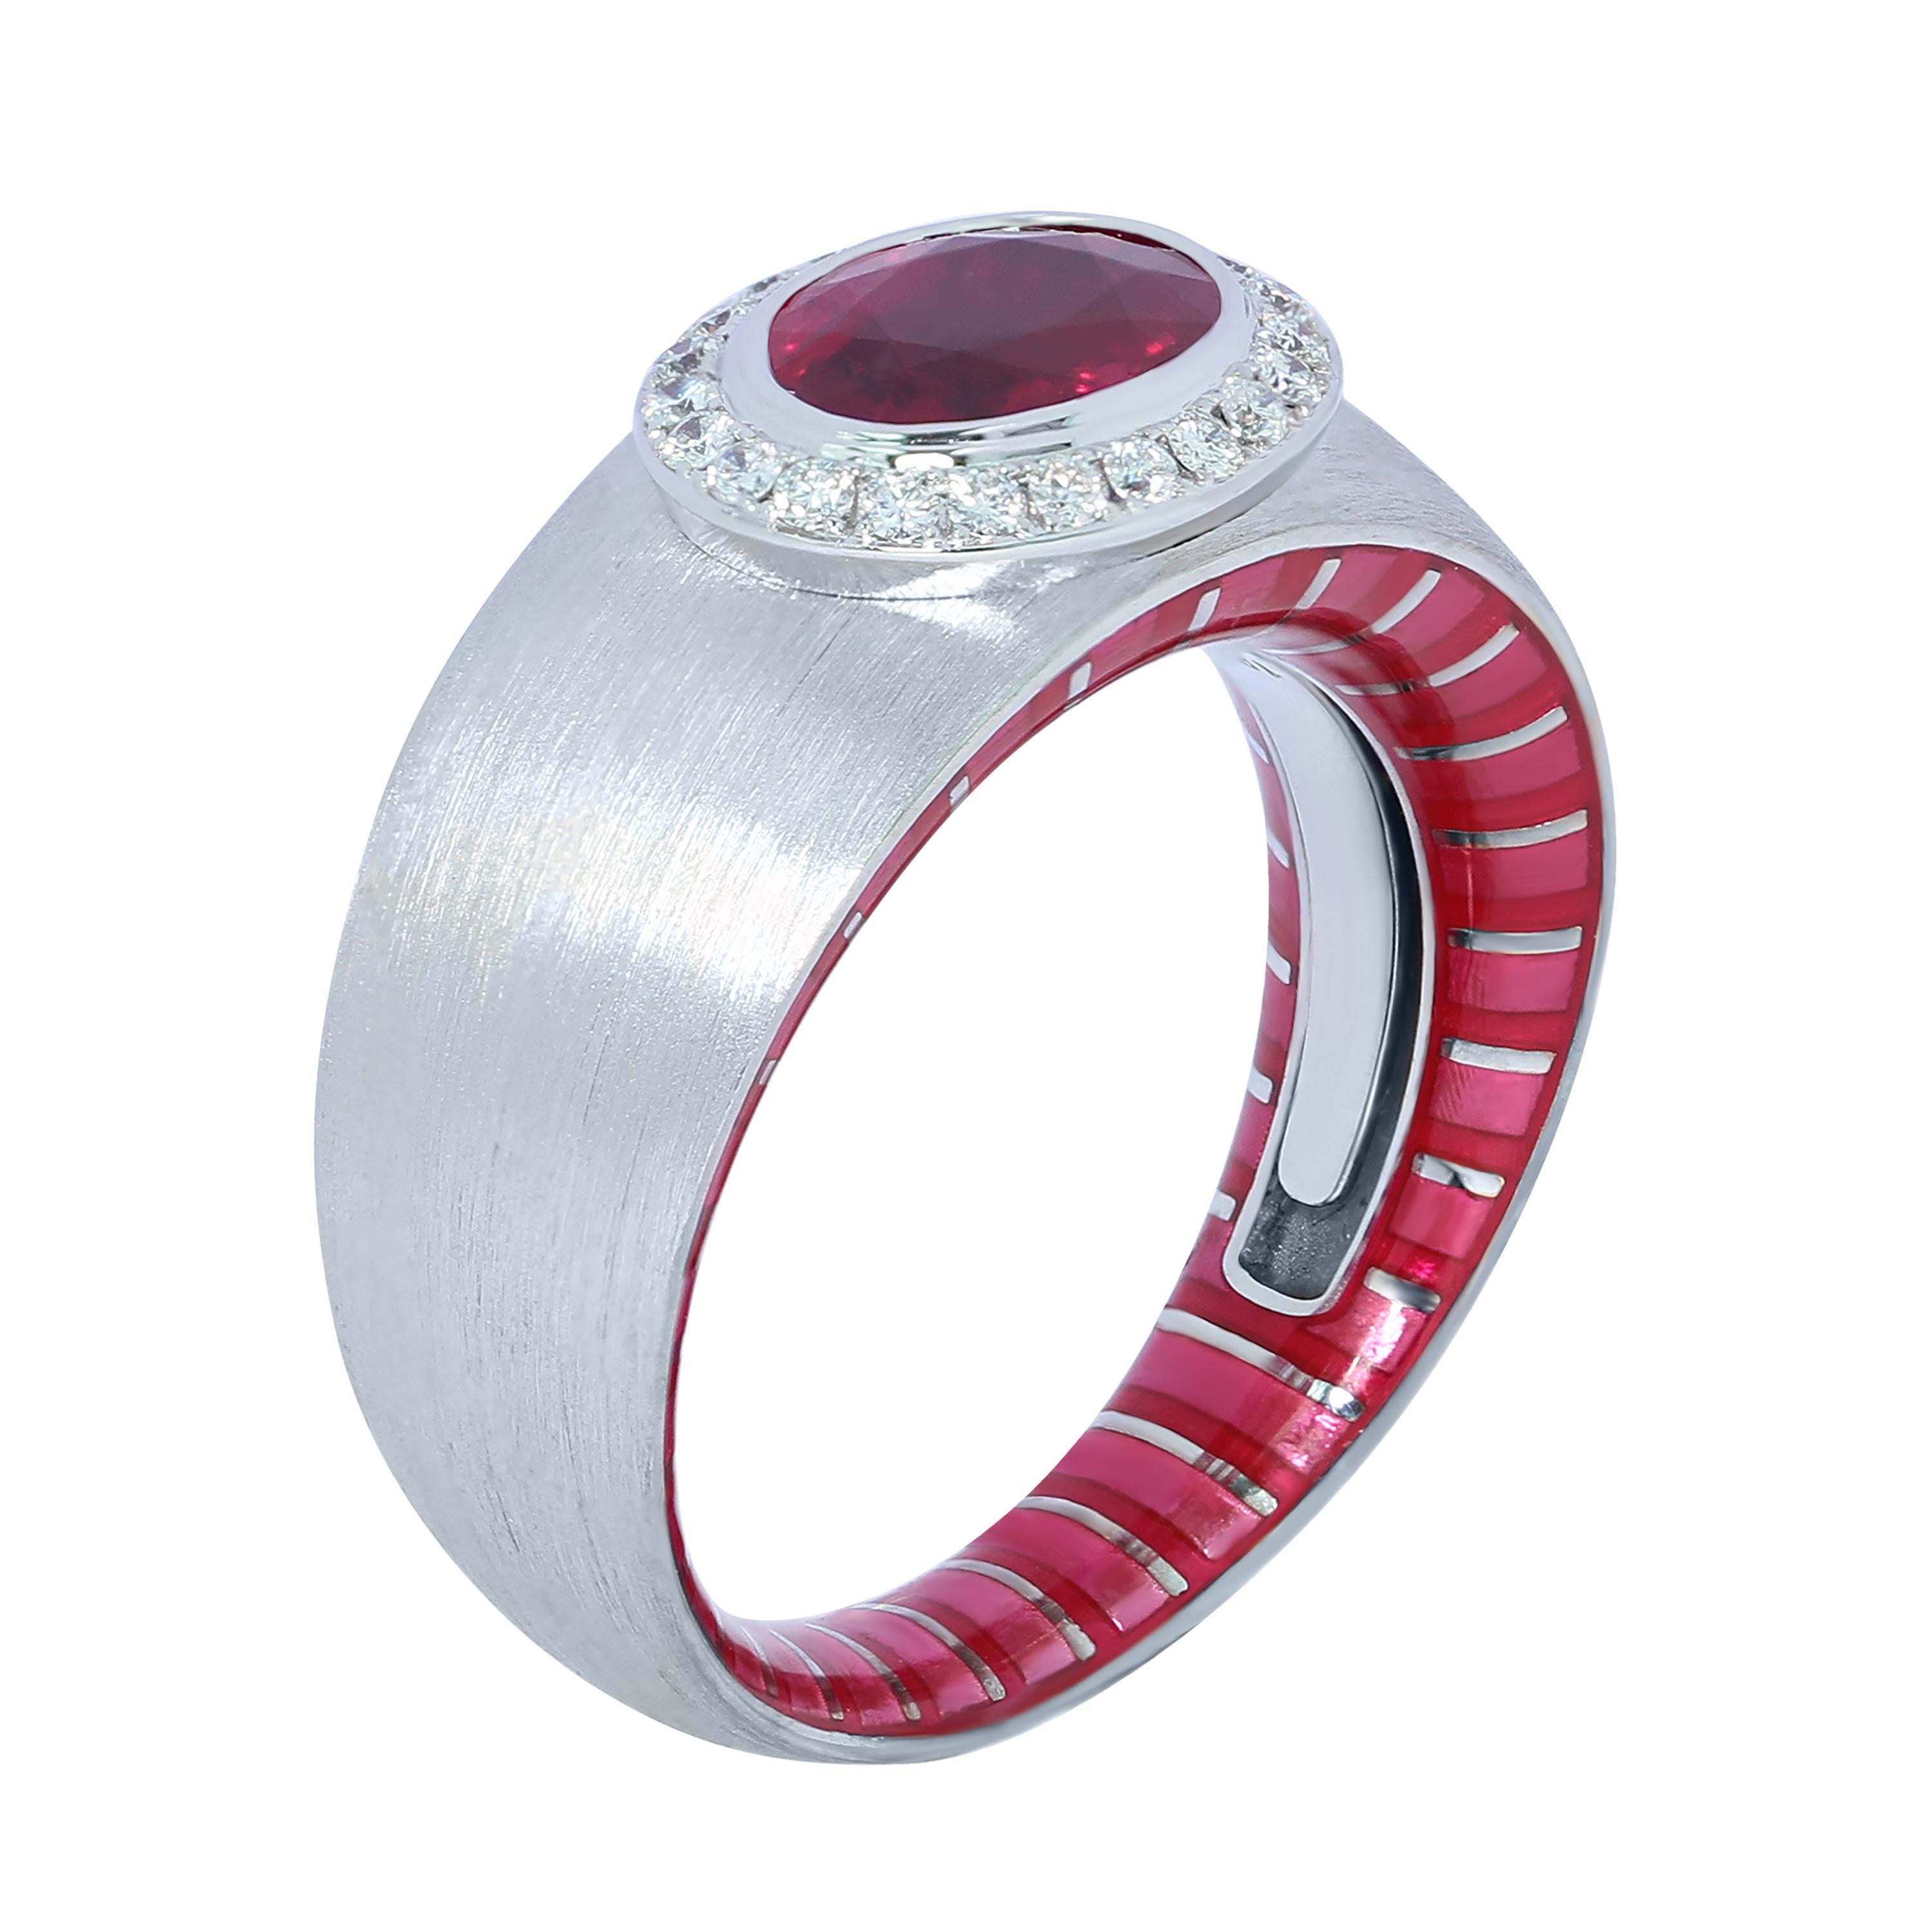 AIGL Certified 2,01 Carat Ruby Diamond Enamel 18 Karat White Gold Ring
Explore the infinite combinations of Kaleidoscope Collection. It's all about mixing and matching! Take a closer look at this spectacular Ring. Made from 18K White Gold, it